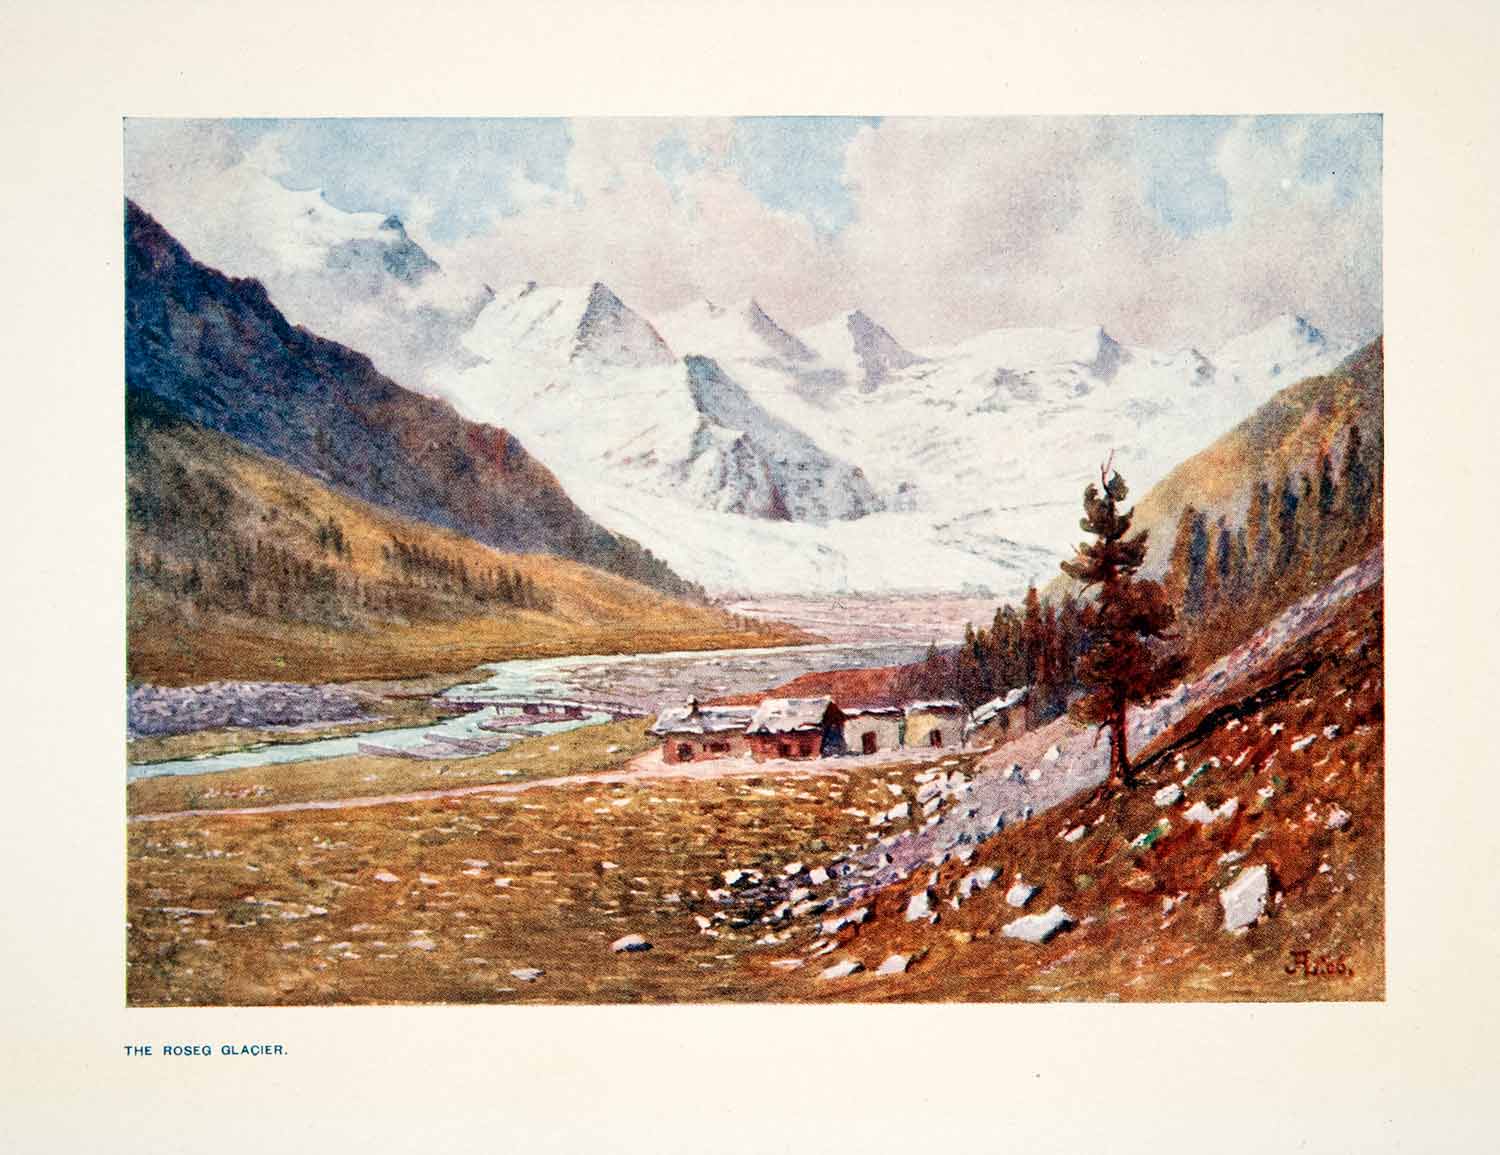 1907 Color Print Rosegg Glacier Mountains Switzerland Forest Valley River XGPB6